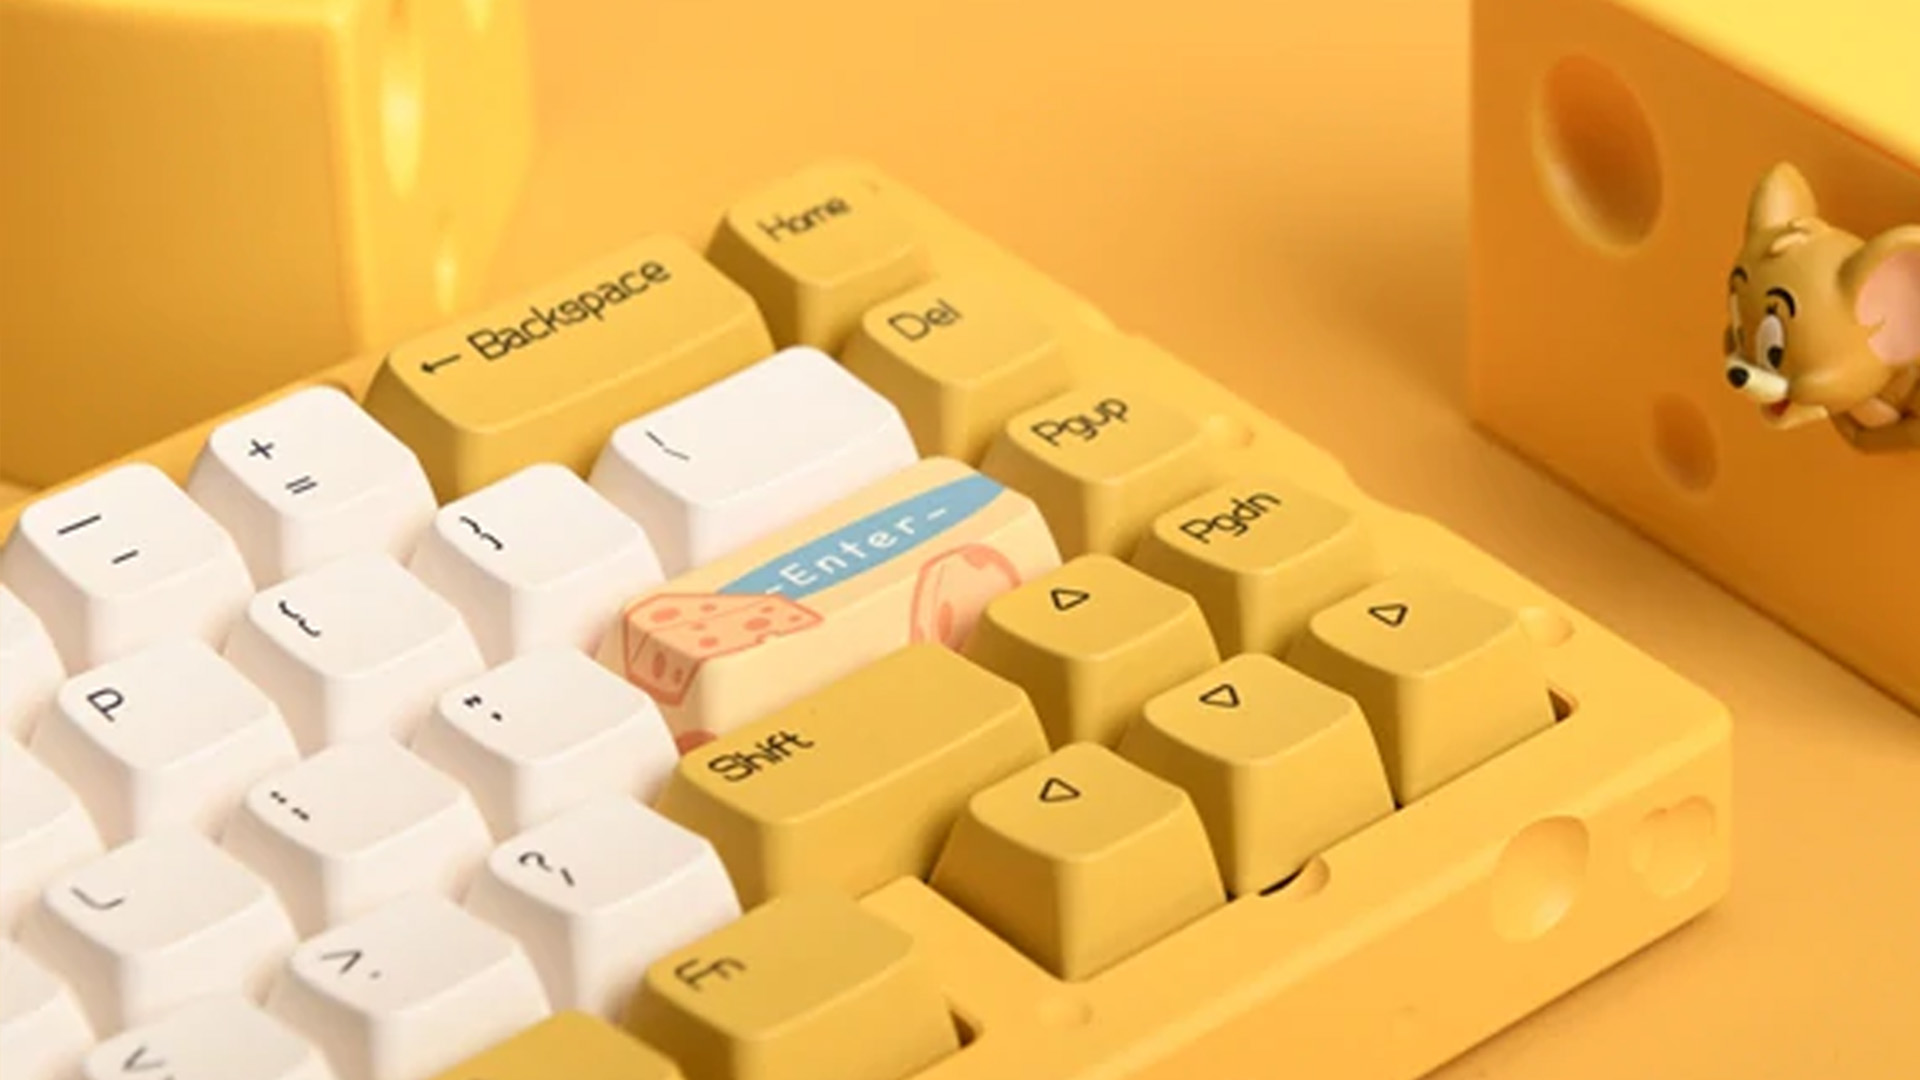 Ajazz mechanical keyboard designed to look like some cheese.